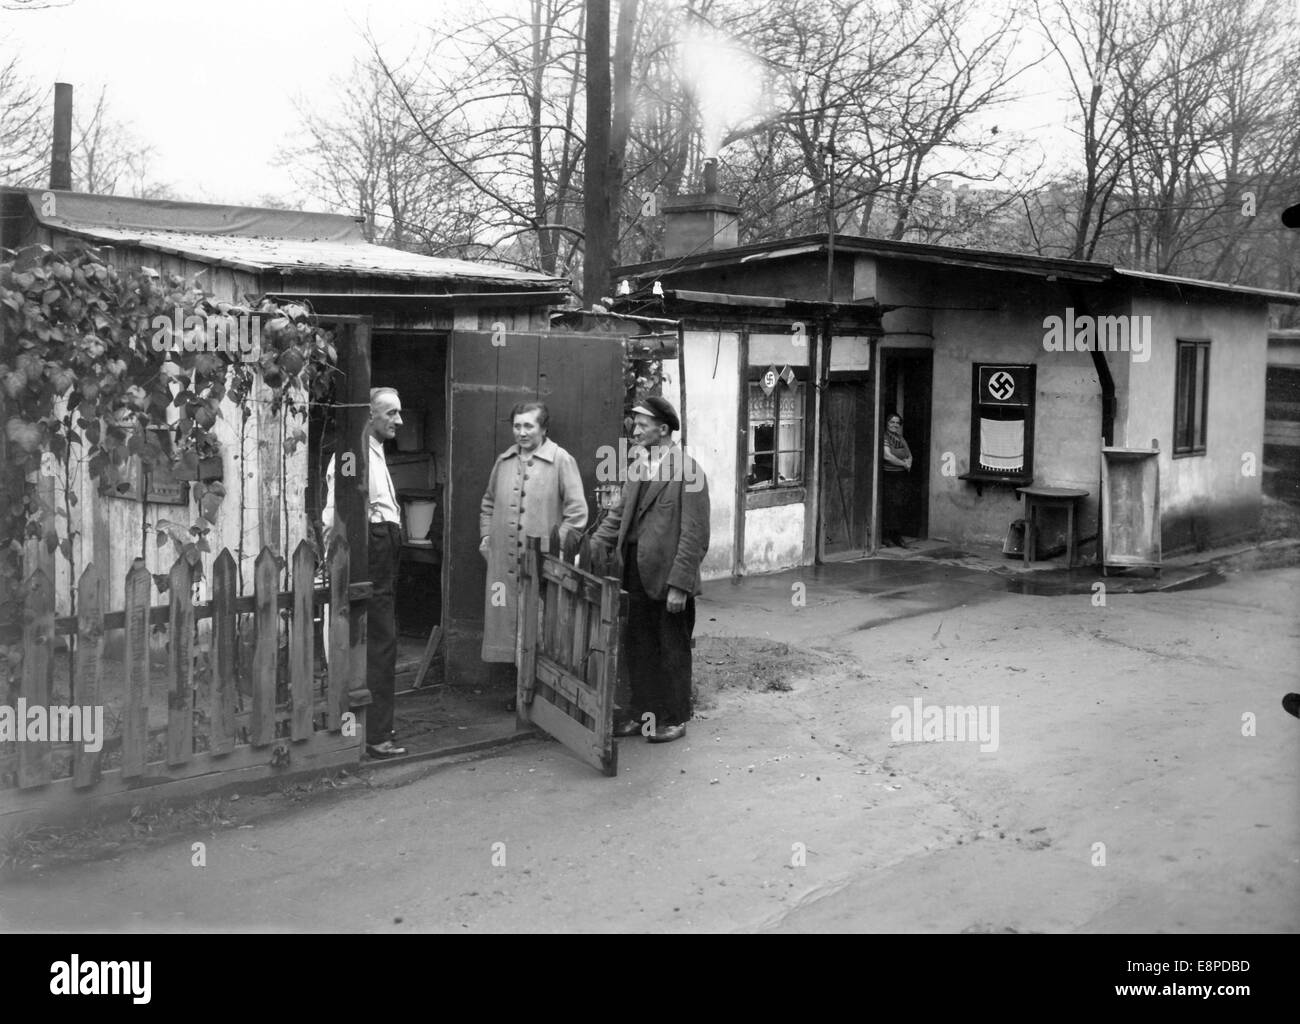 The picture from a Nazi news report shows - in the run-up to the Munich Agreement - the poor housing conditions for Sudeten Germans in Aussig (today Usti nad Labem, Czech Republic), 1938. The windows of the shacks are decorated with swastika flags. Fotoarchiv für Zeitgeschichtee - NO WIRE SERVICE Stock Photo